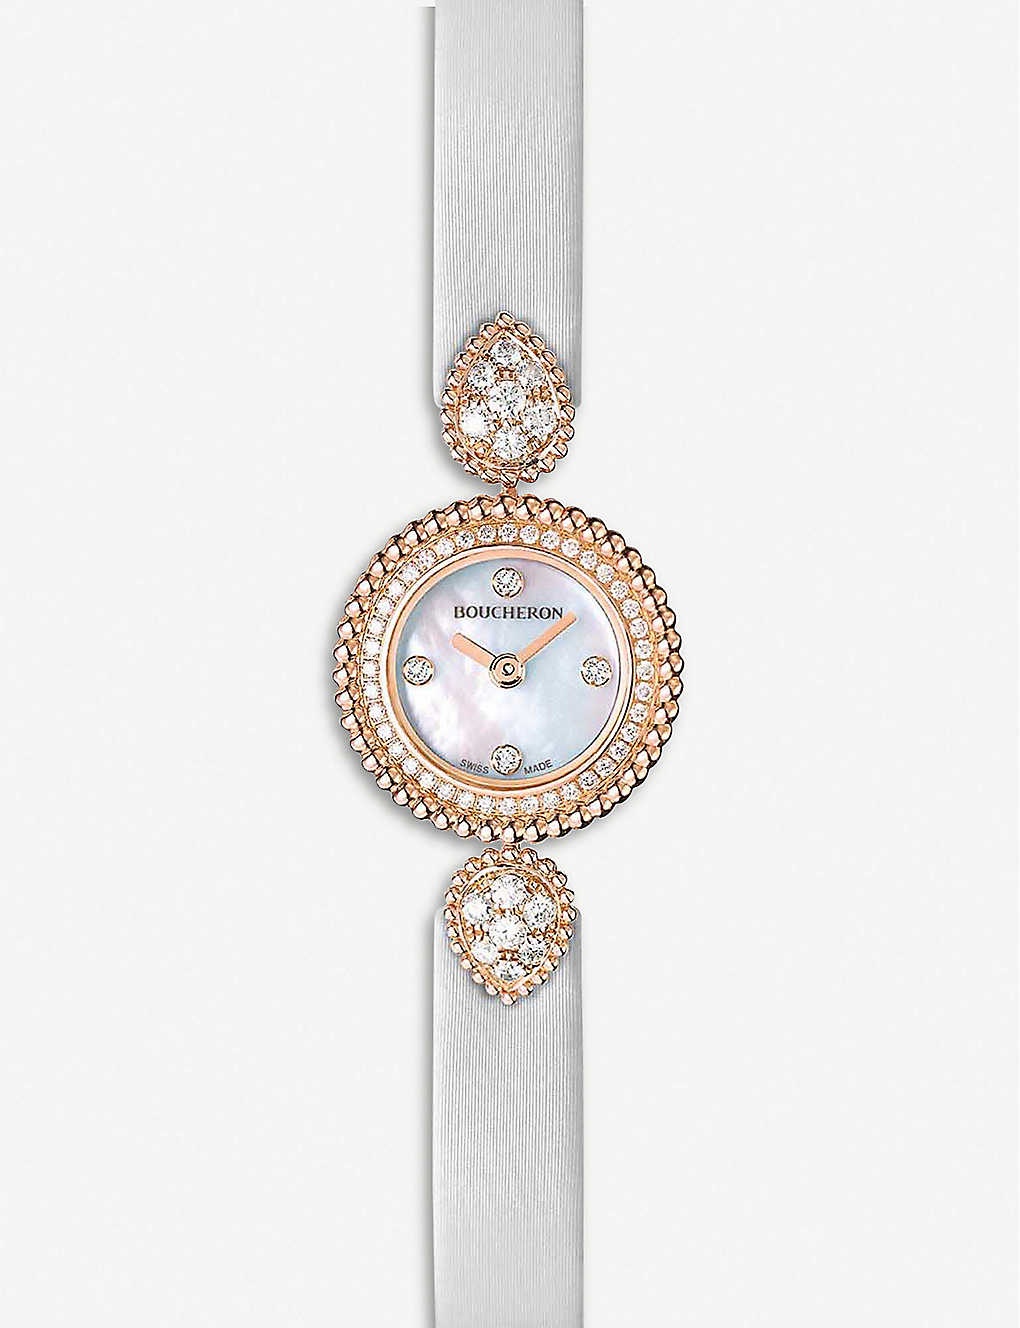 WA015507 Serpent Bohème 18ct rose-gold, diamond and mother-of-pearl watch - 1